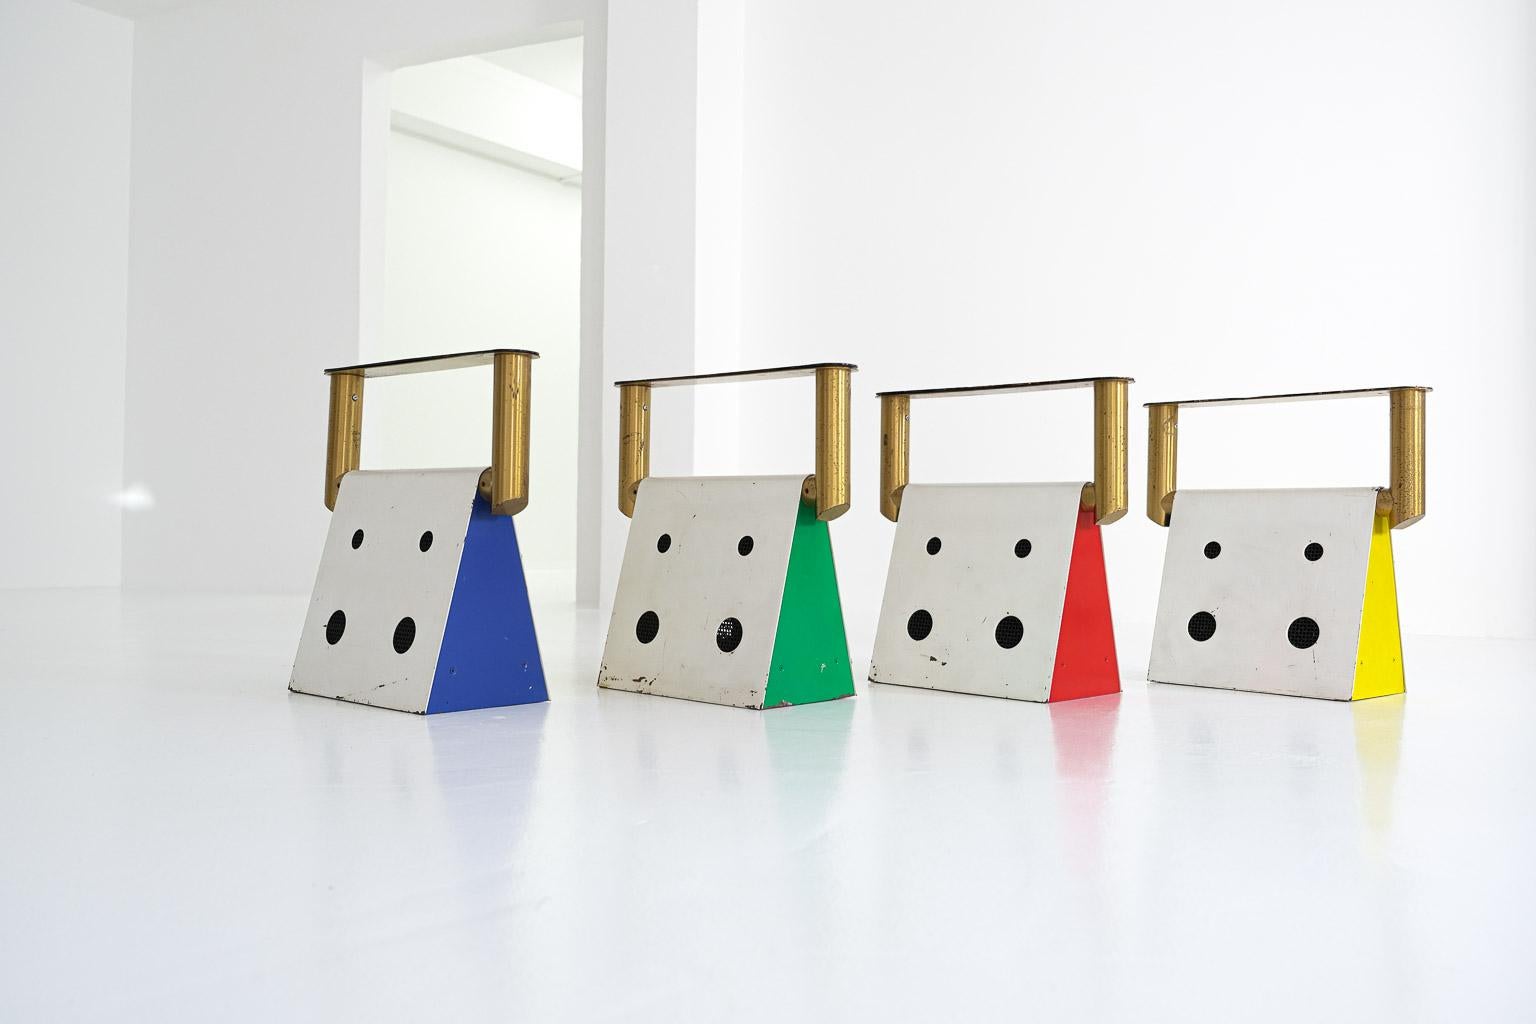 Very rare set of four custom-made wall or ceiling lamps with triangular metal bodies and supported by a golden frame. Designed by Afra and Tobia Scarpa for the Benetton Group in the 1980s. The sides of the lamps are painted either red, blue, green